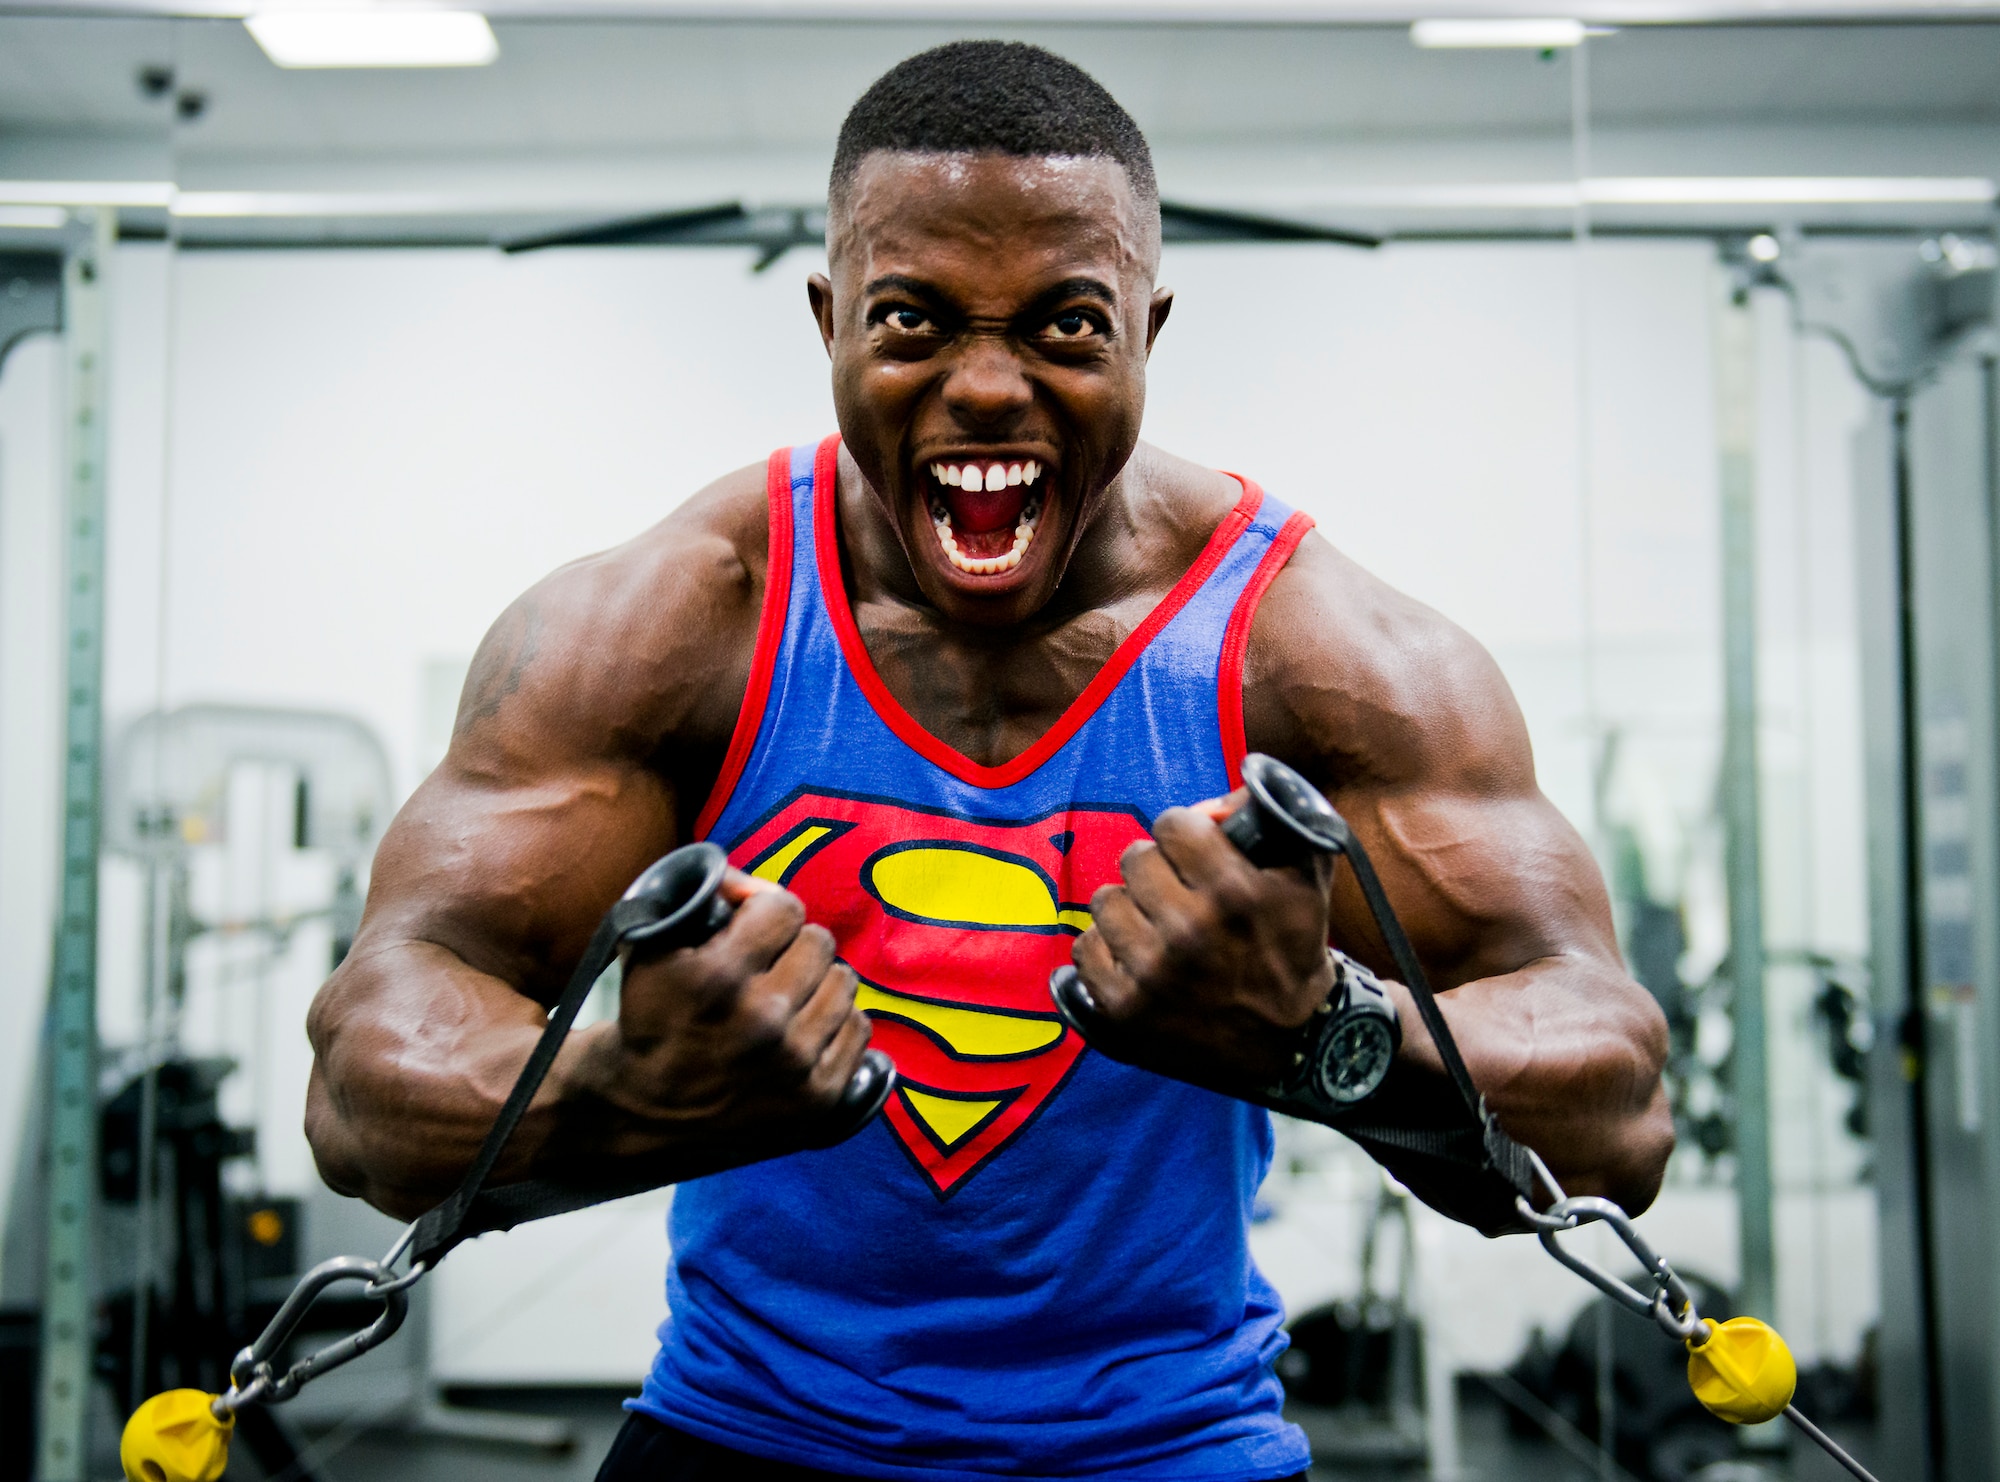 Senior Airman Terrence Ruffin, 16th Electronic Warfare Squadron, strains for an extra rep on a weight machine at the fitness center on Eglin Air Force Base, Fla.  In November, the Airman became the youngest professional bodybuilder on the circuit at age 21.  (U.S. Air Force photo/Samuel King Jr.)